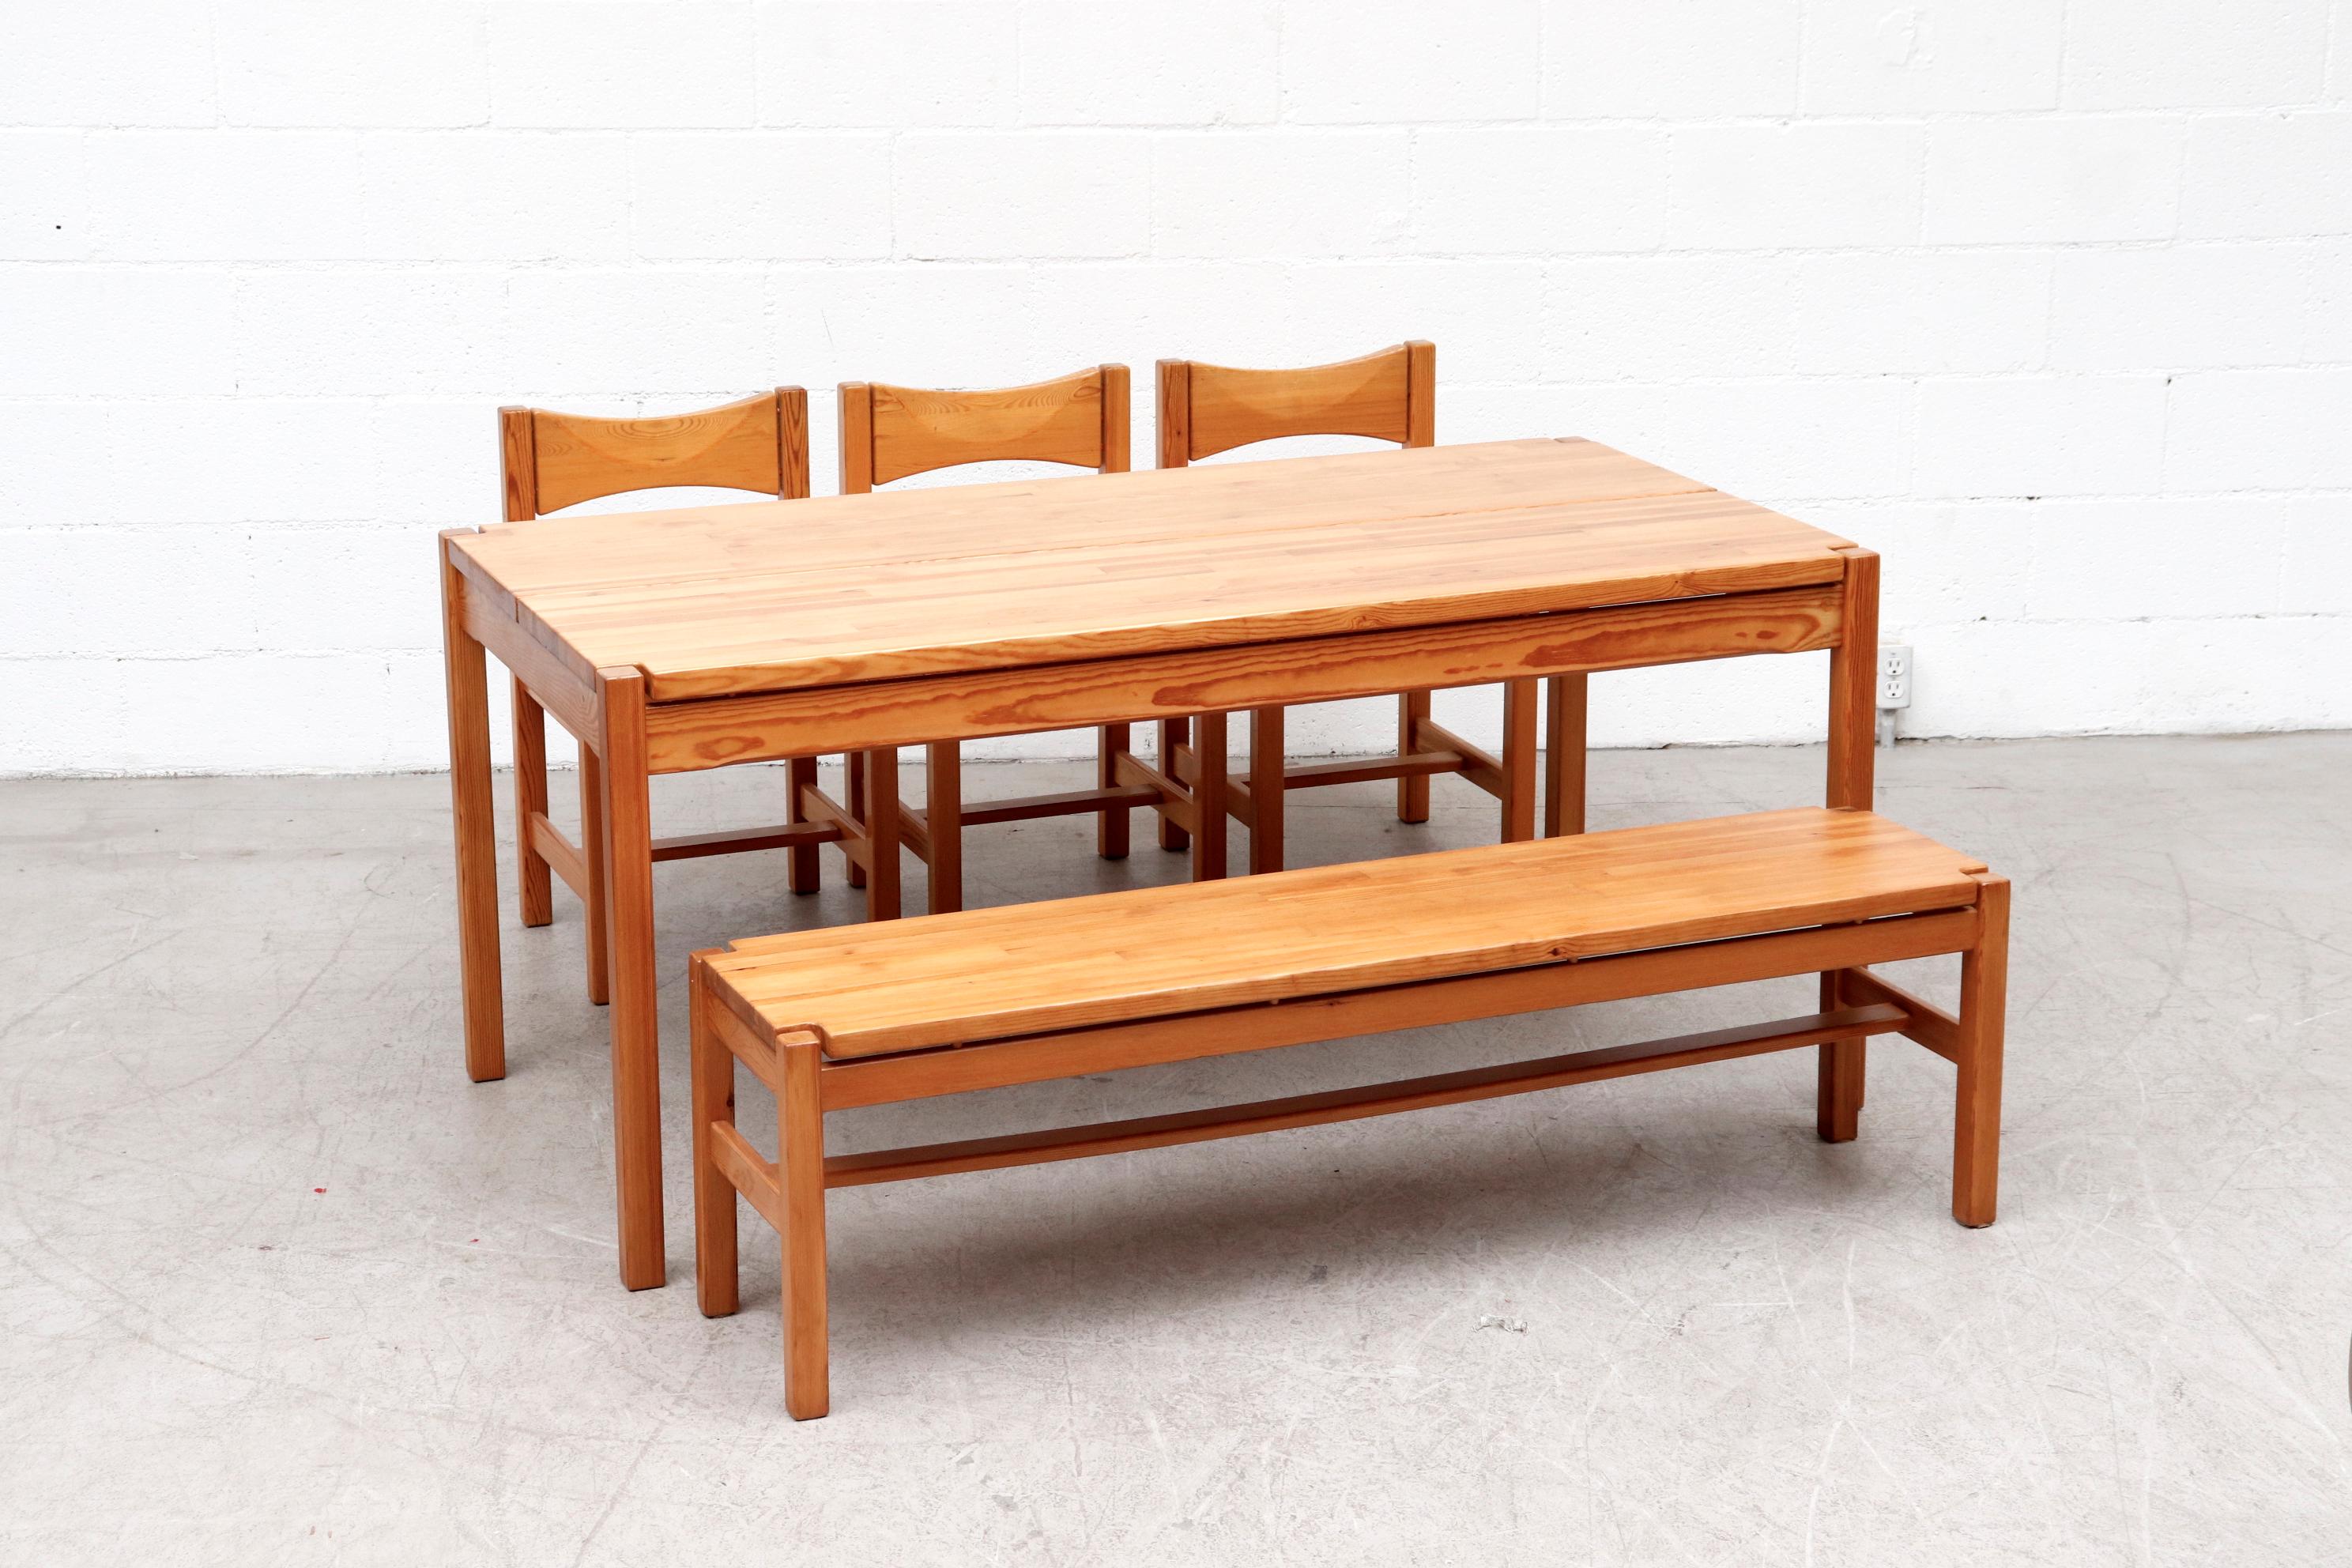 Mid-20th Century Tapiovaara Pine Dining Set with Bench and 3 Chairs